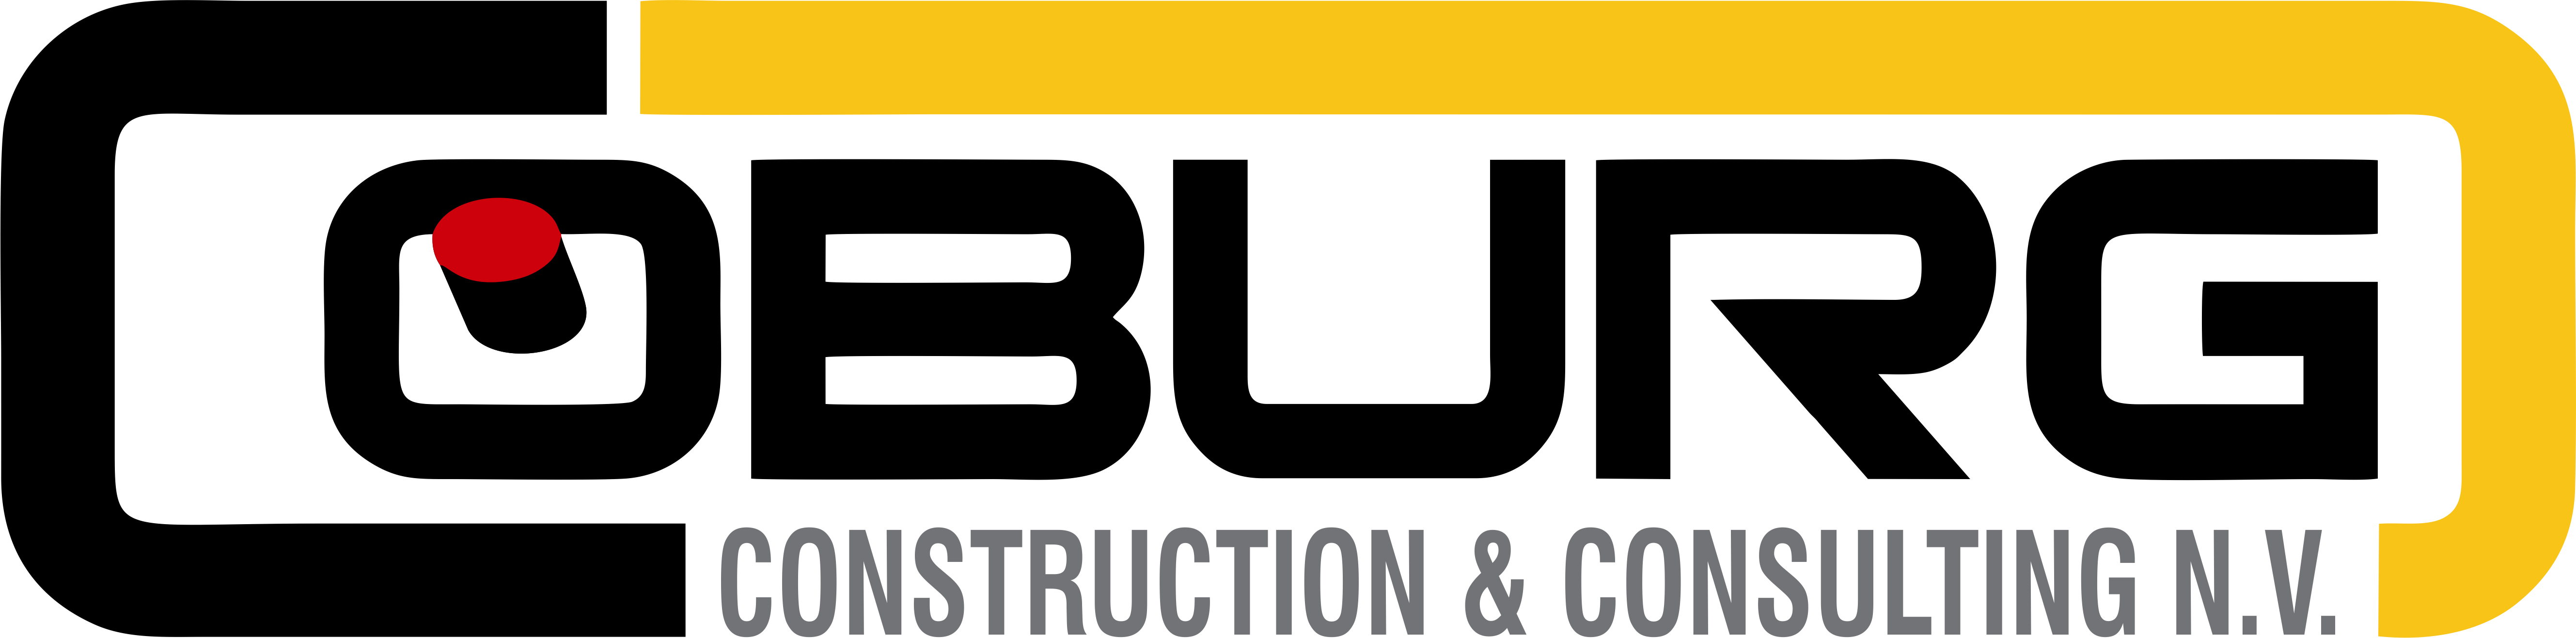 Welcome to Coburg Construction and Consulting N.V